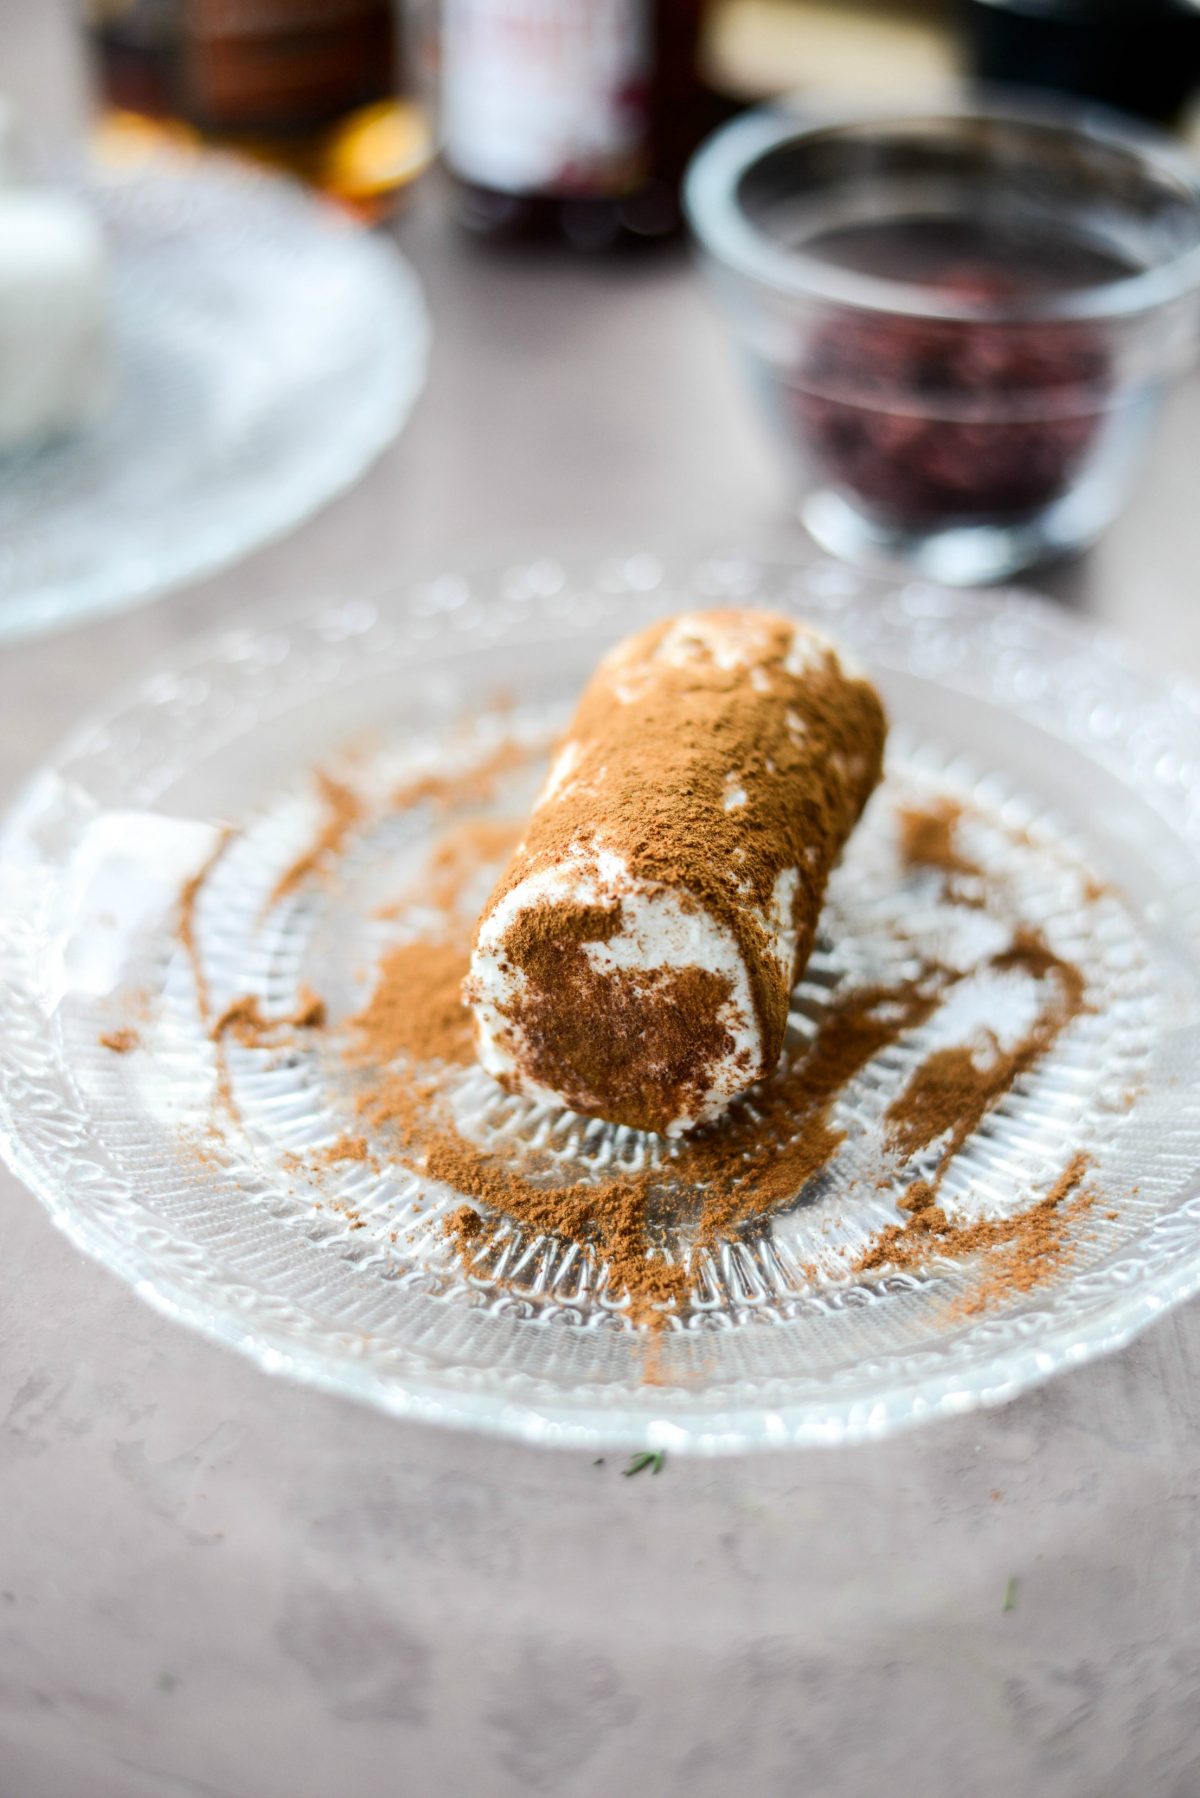 goat cheese rolled in cinnamon